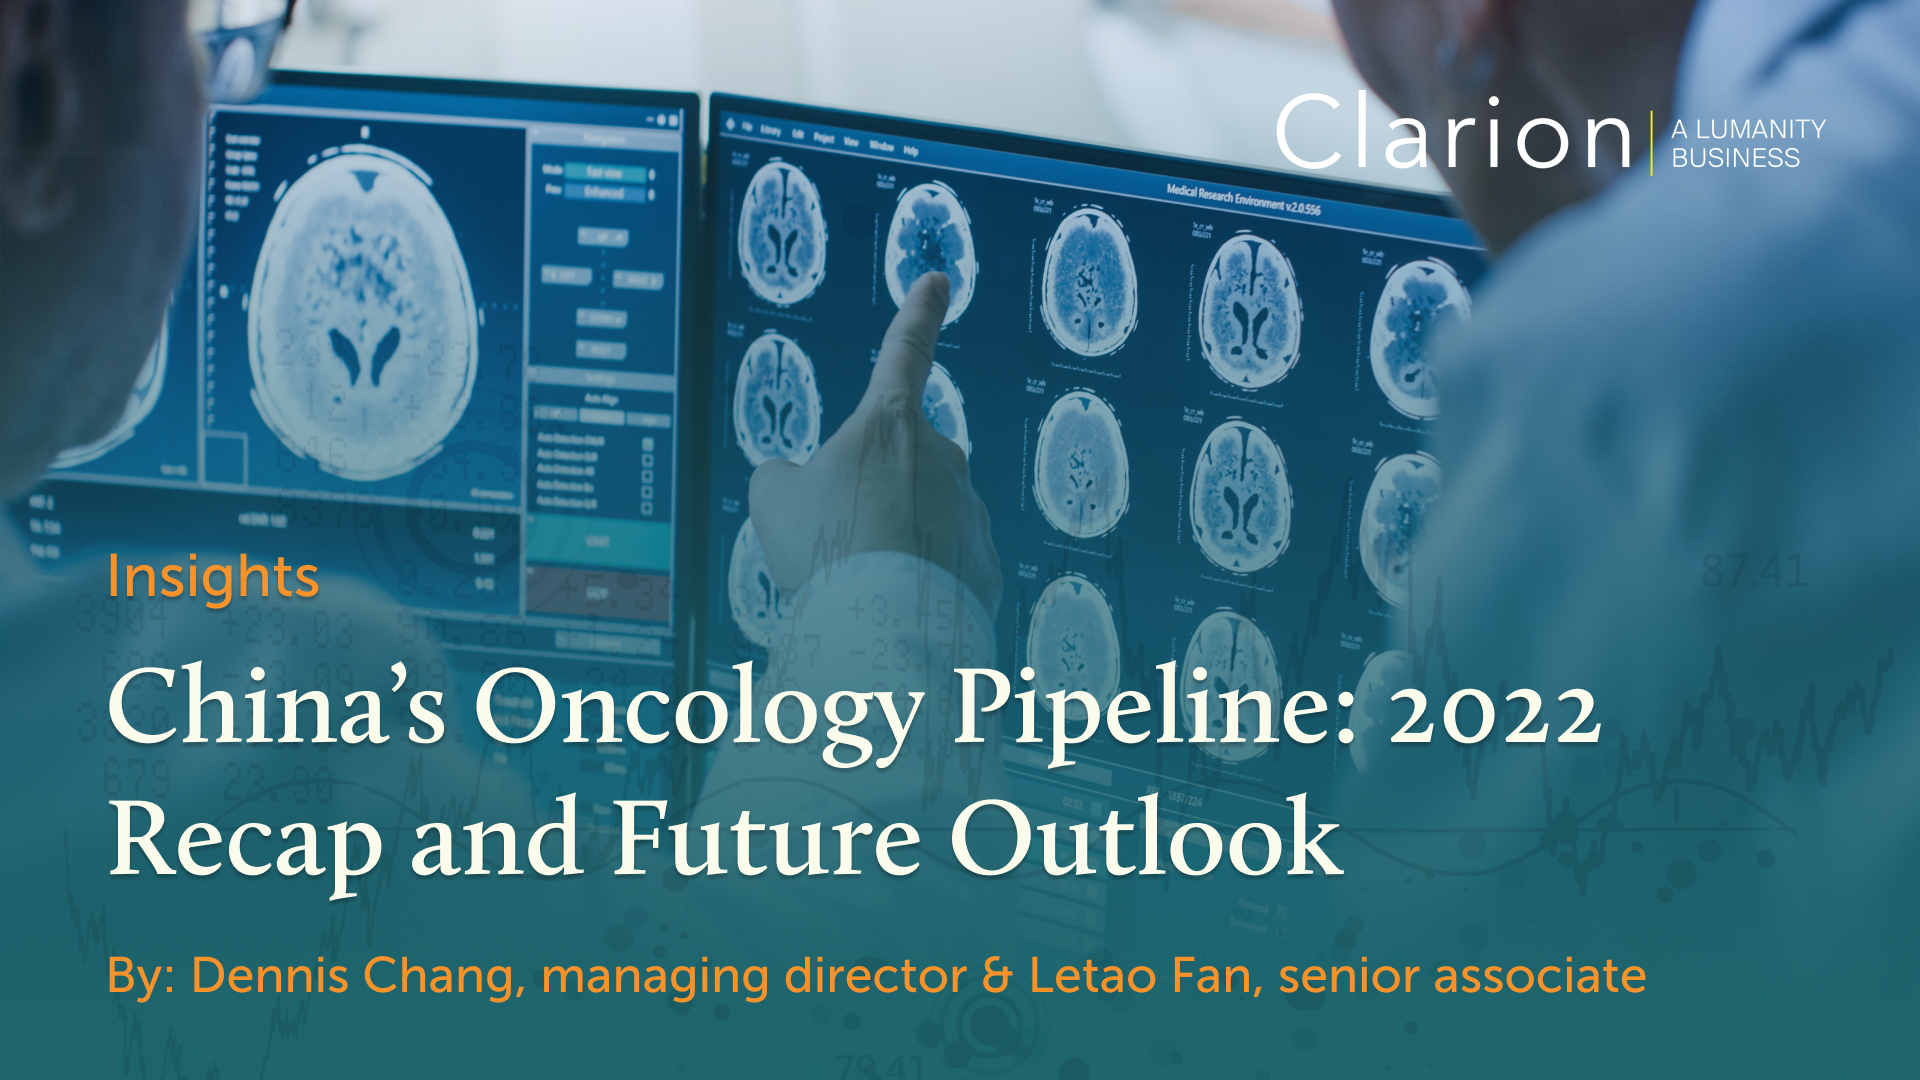 China's oncology pipeline: 2022 Recap and future outlook